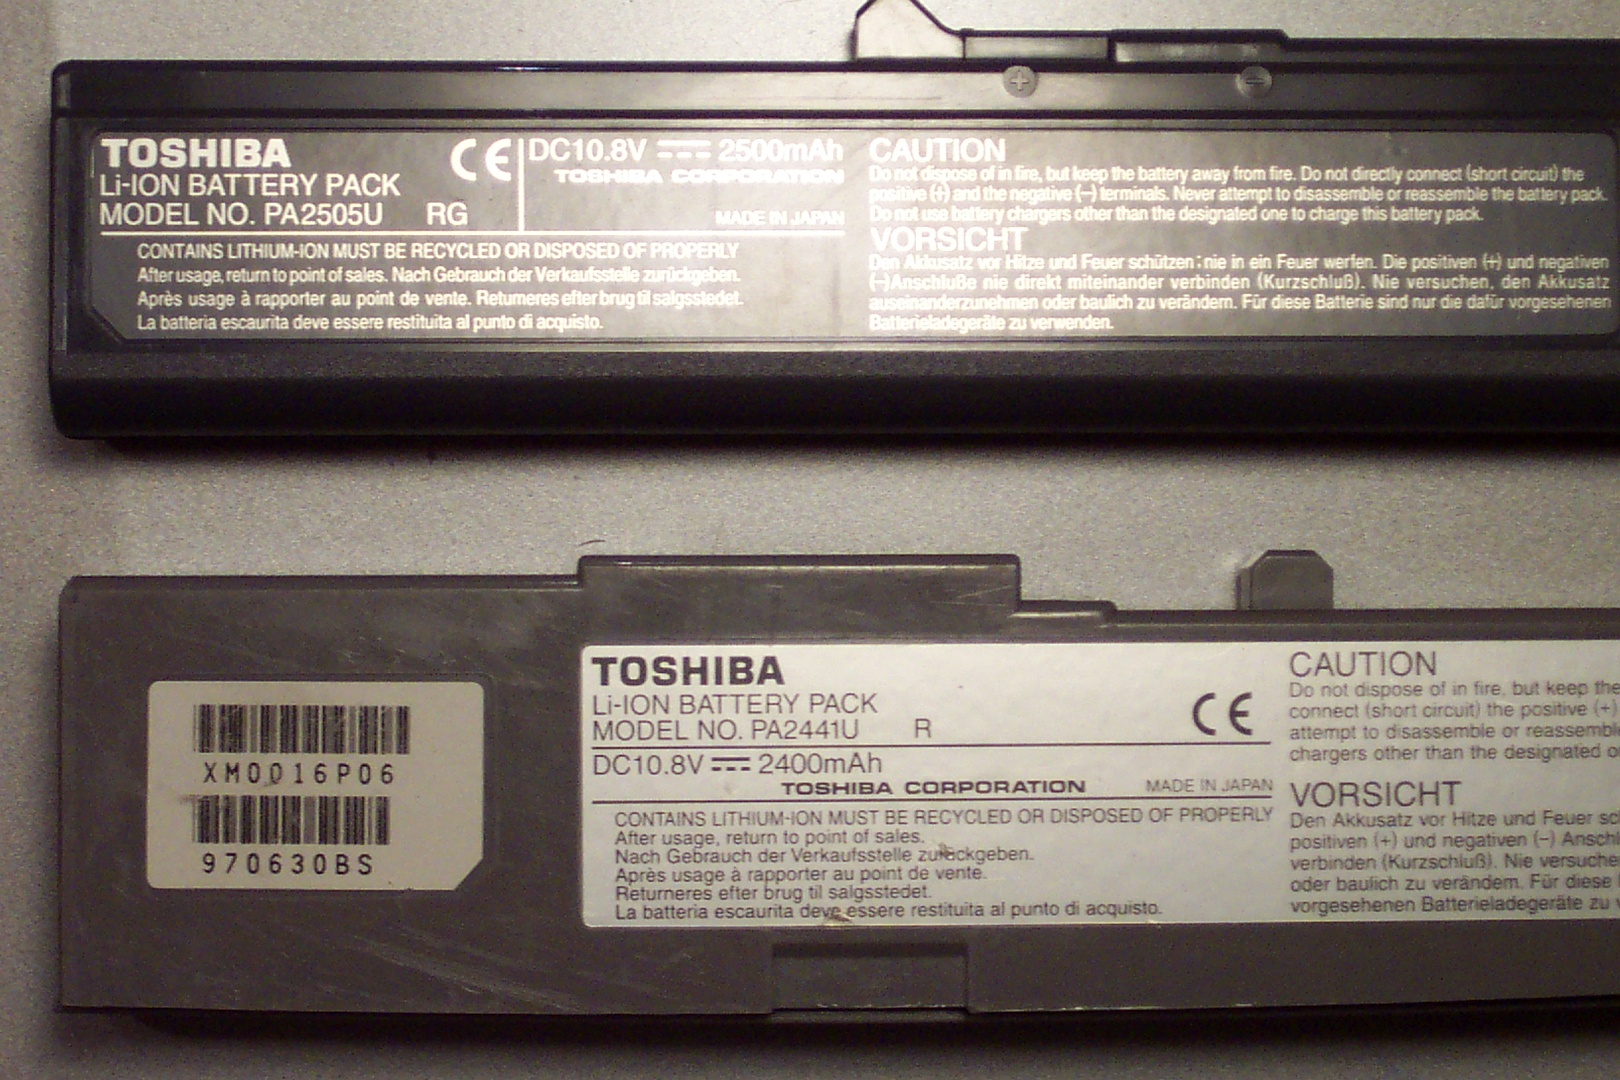 A close up of two laptop batteries, Toshiba Li-Ion battery pack model numbers PA2505U and PA2441U